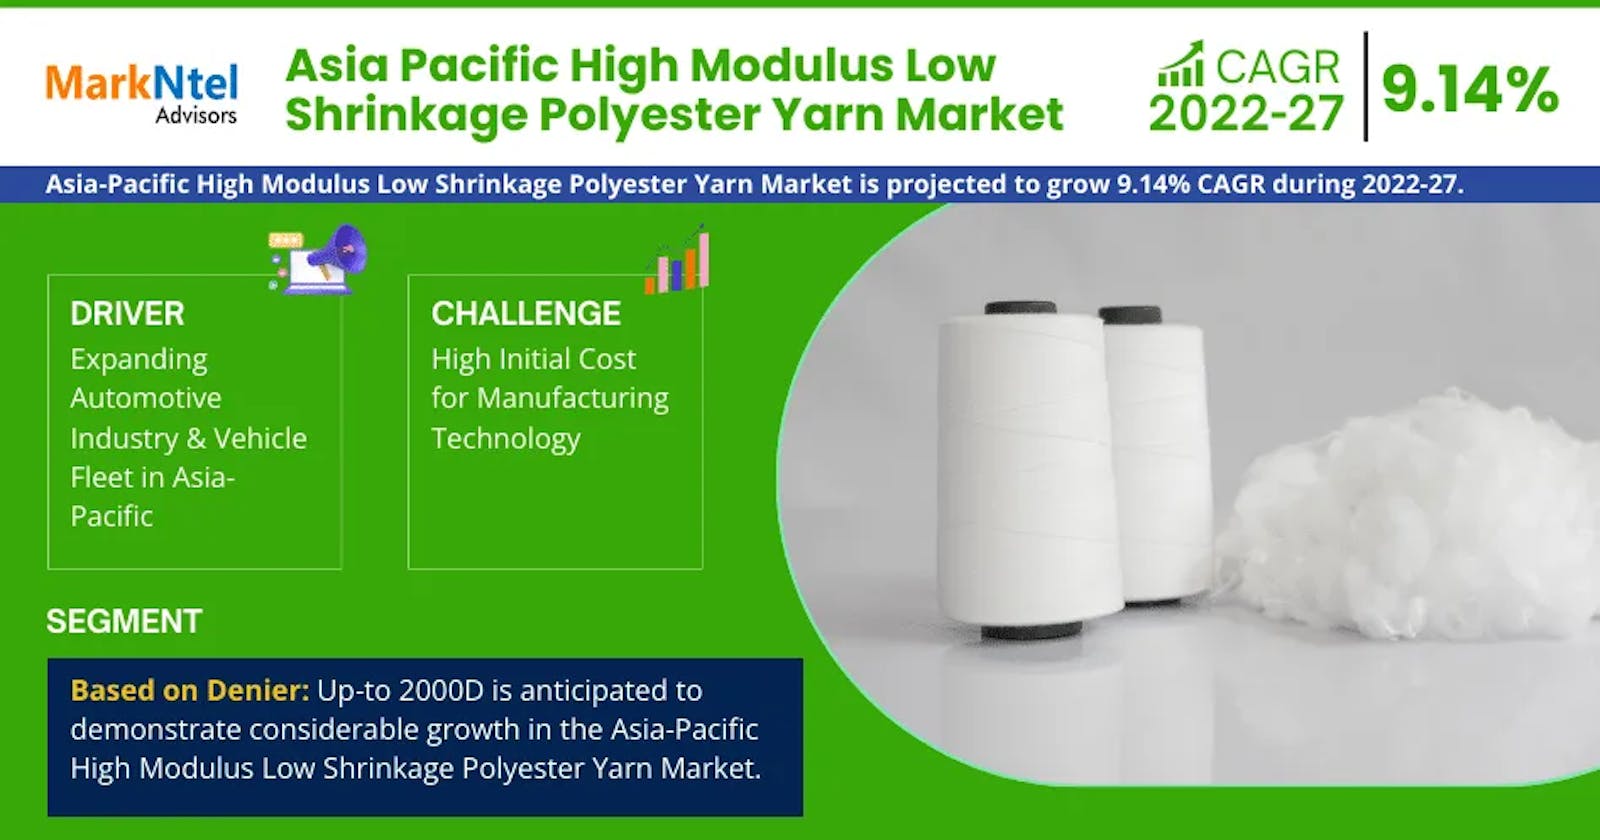 Asia Pacific High Modulus Low Shrinkage Polyester Yarn Market Trends: Analysis of 9.14% CAGR Growth (2022-27)